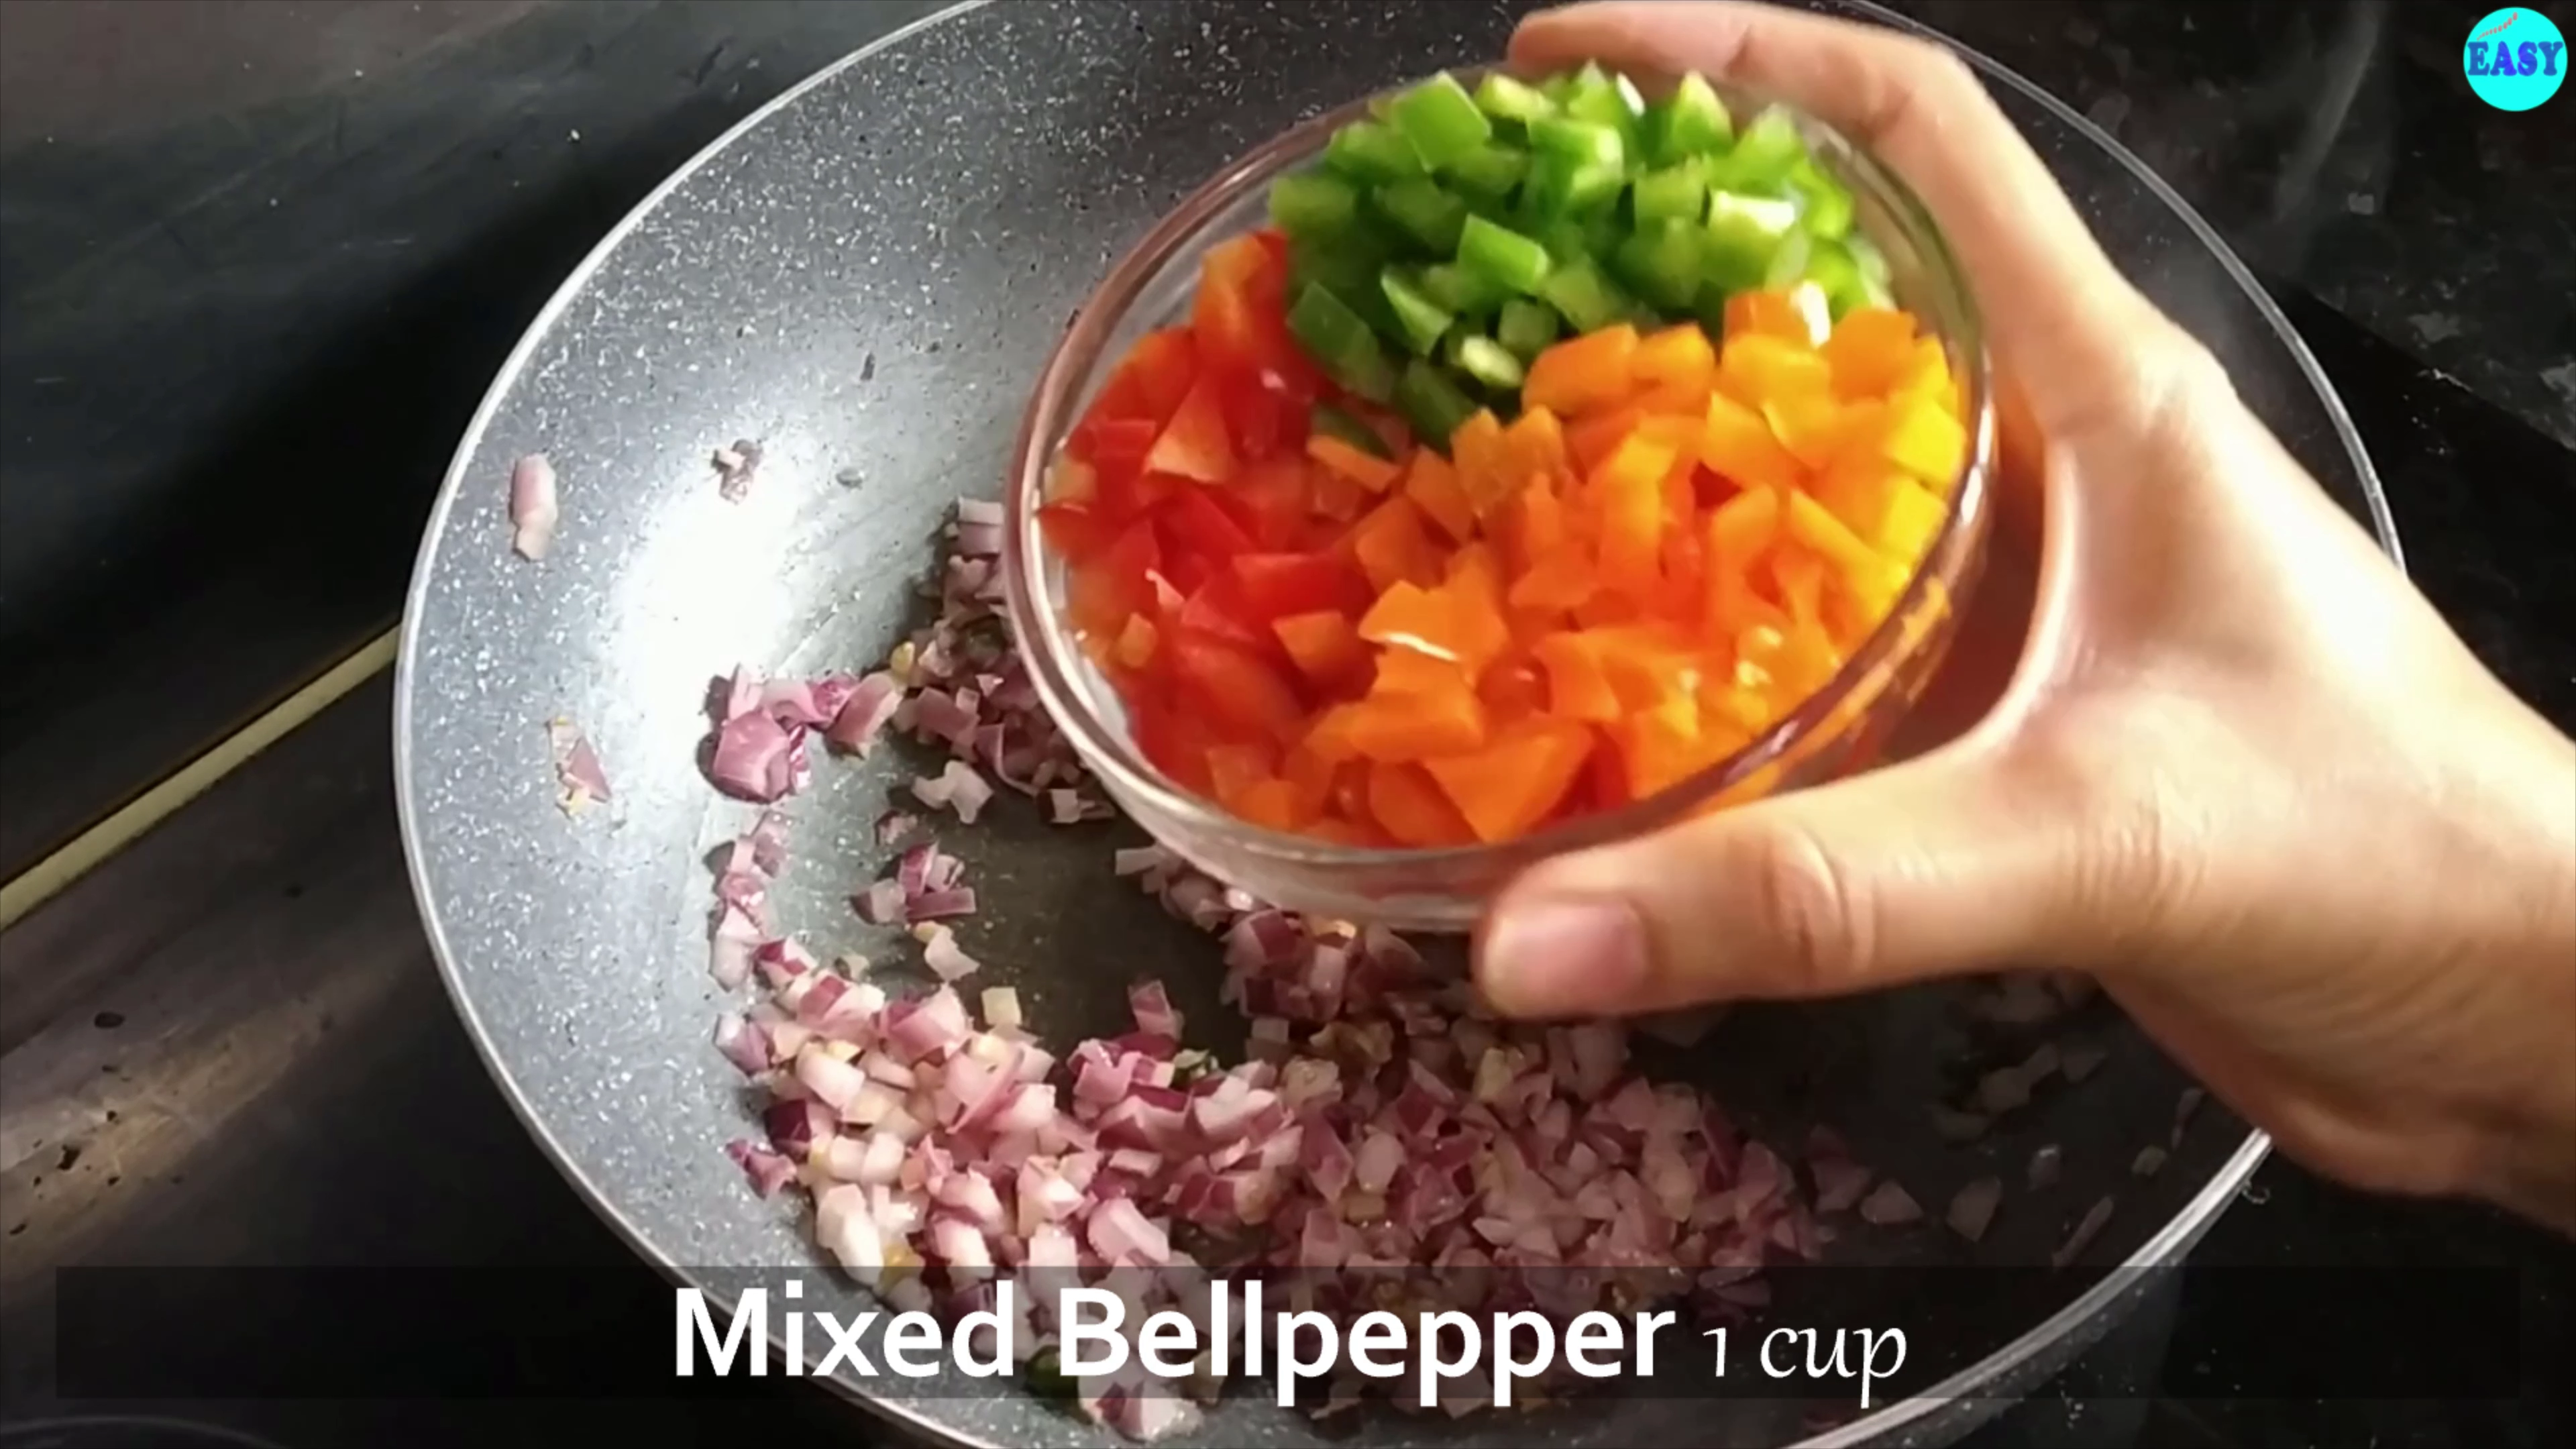 Step 5 - Add bell peppers and cook for 1 minute. 